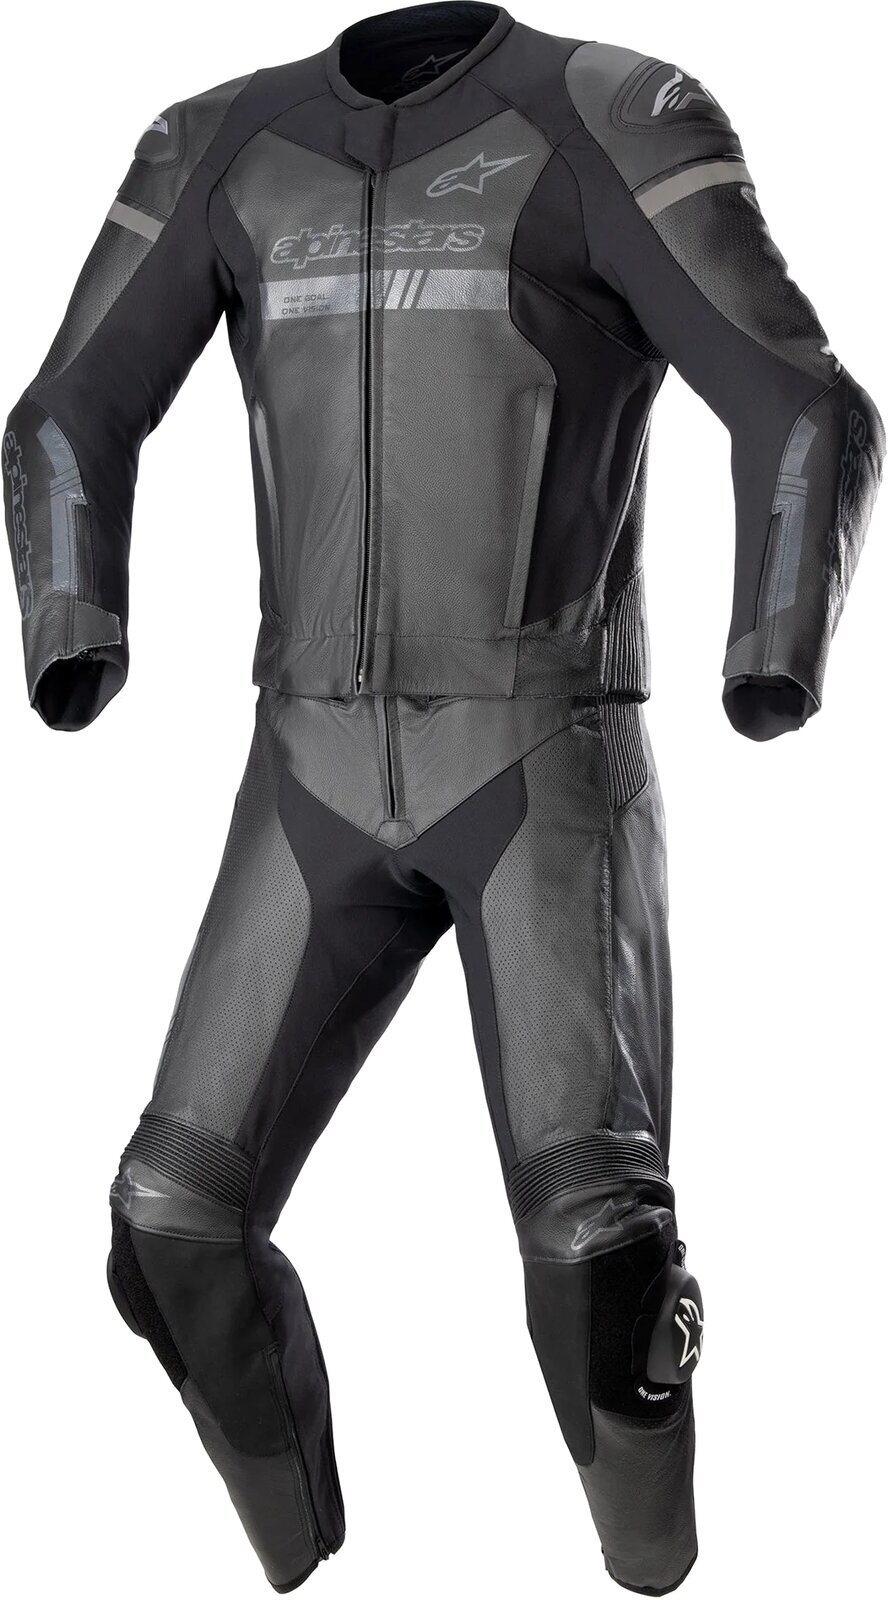 Two-piece Motorcycle Suit Alpinestars GP Force Chaser Leather Suit 2 Pc Black/Black 52 Two-piece Motorcycle Suit